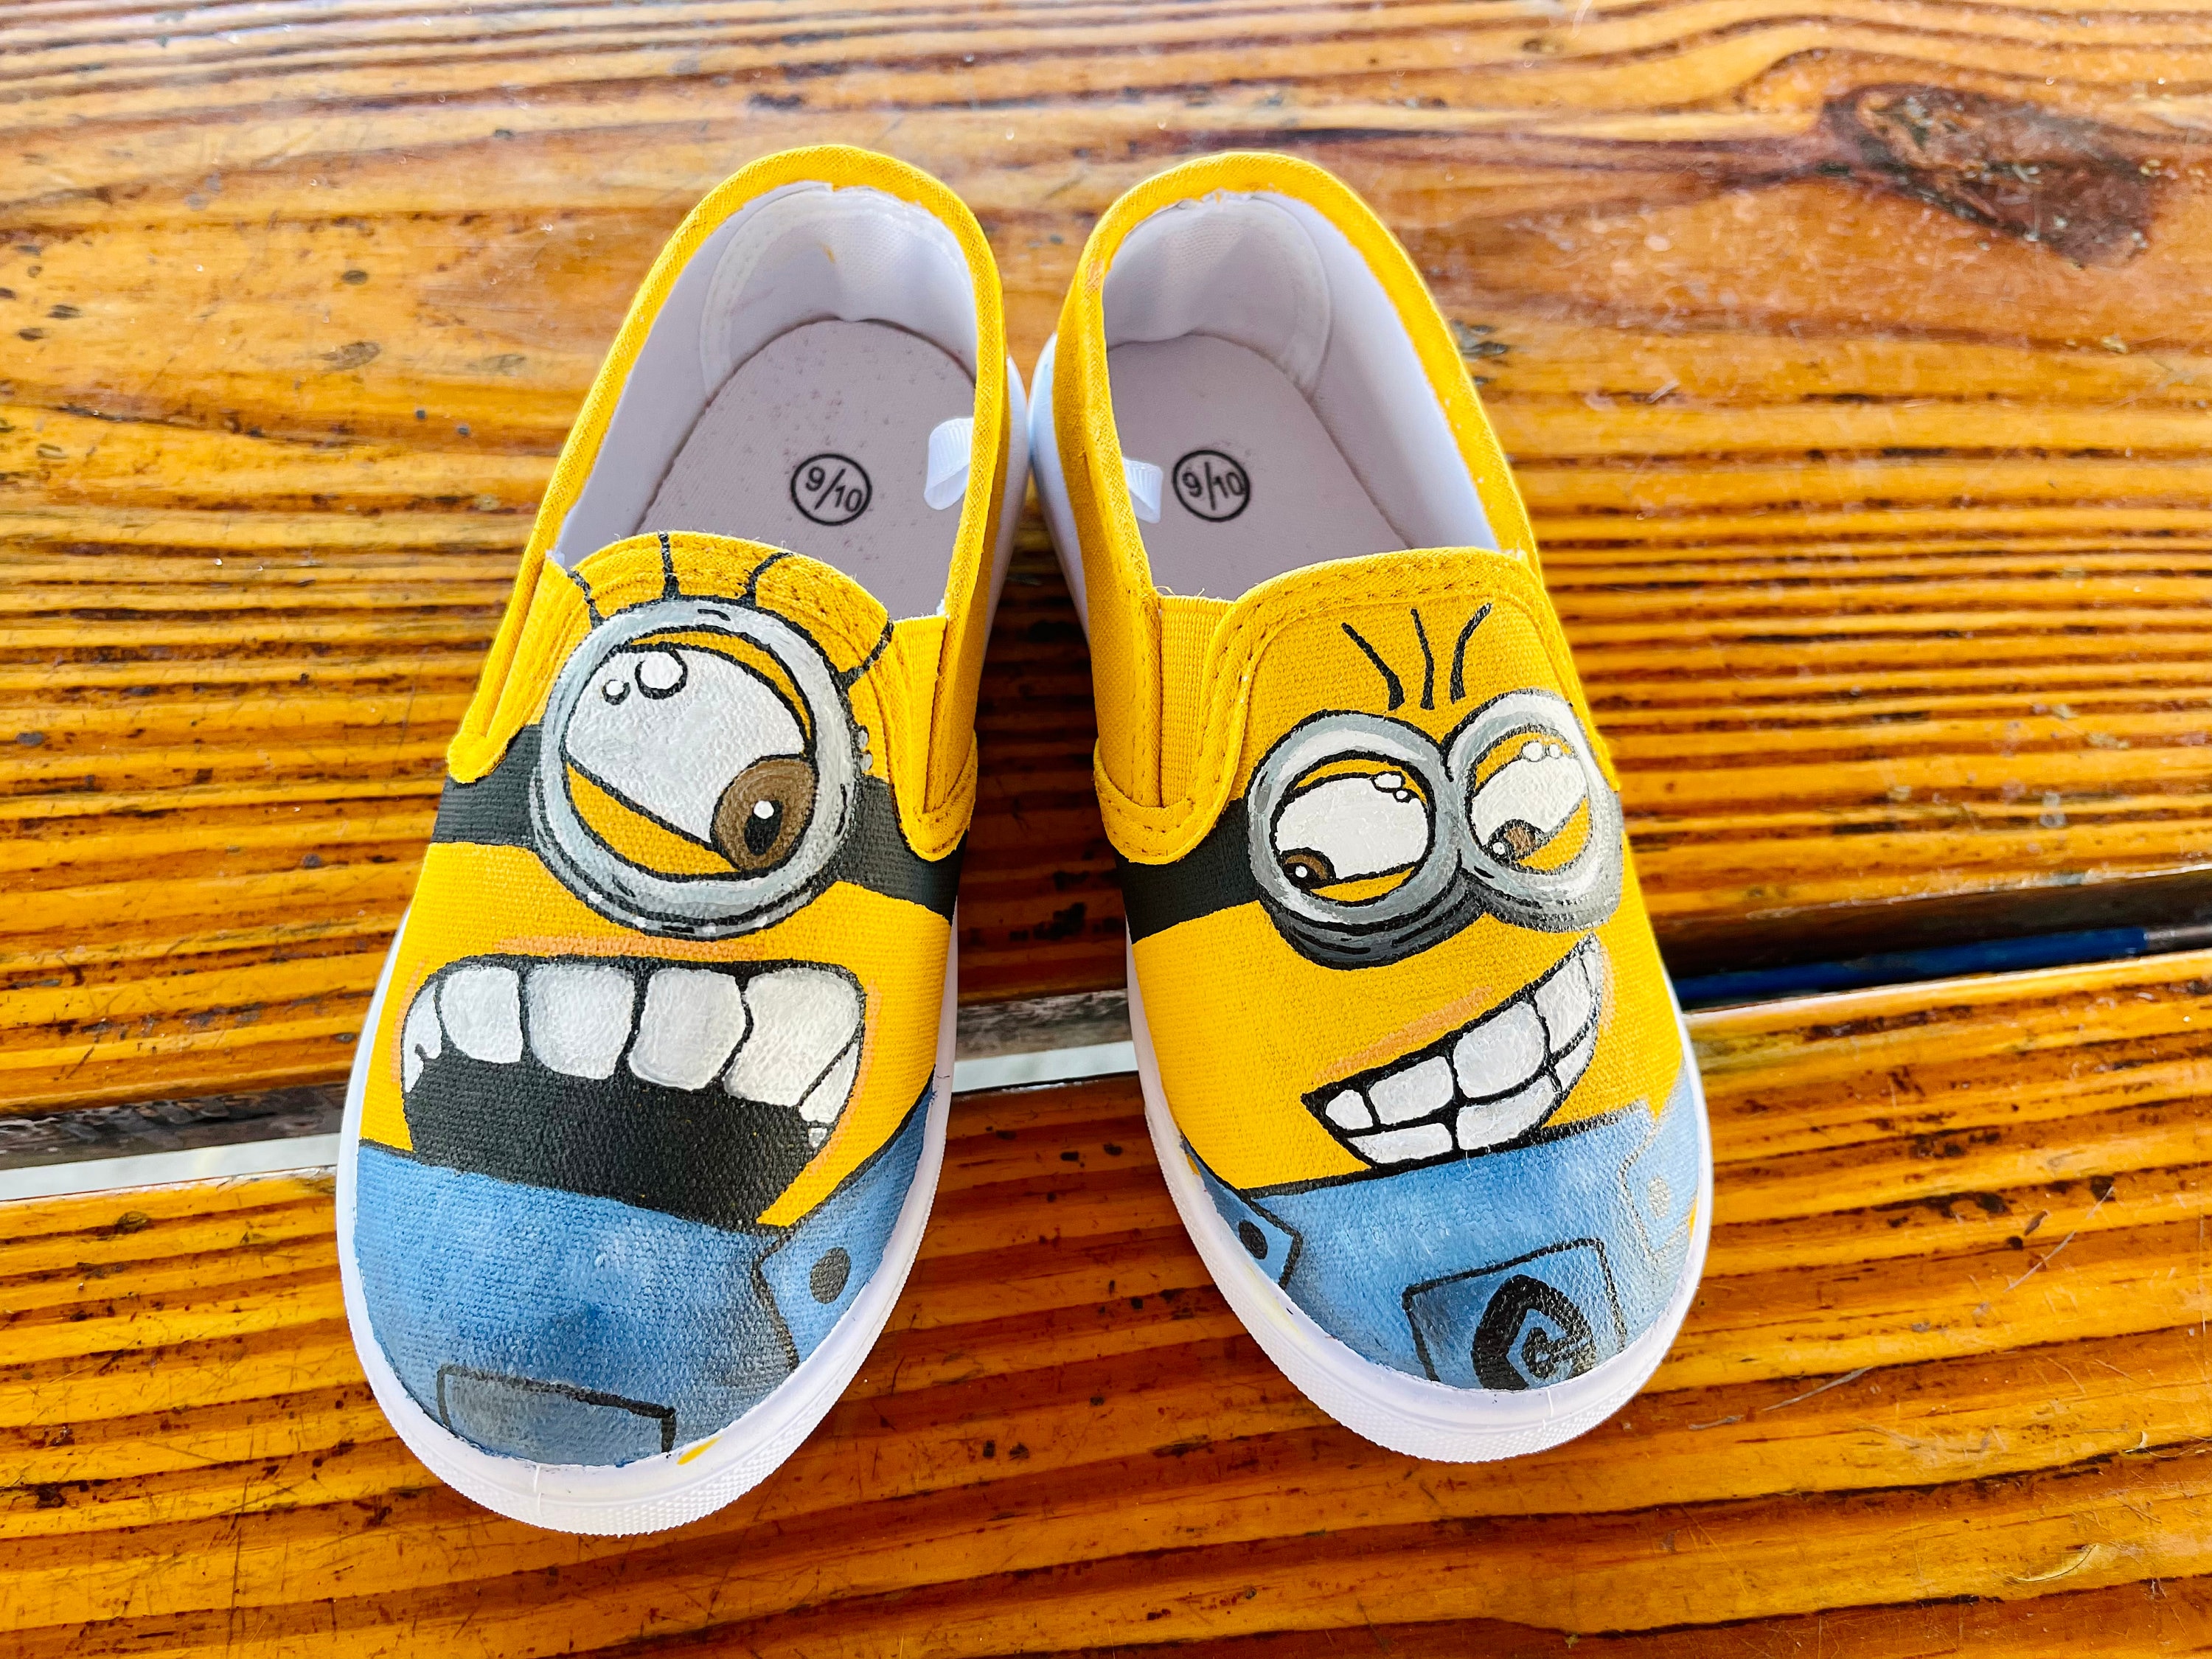 F-GALI The Minion Slip-on Shoes Canvas Shoes For Women - Buy Multicolor  Color F-GALI The Minion Slip-on Shoes Canvas Shoes For Women Online at Best  Price - Shop Online for Footwears in